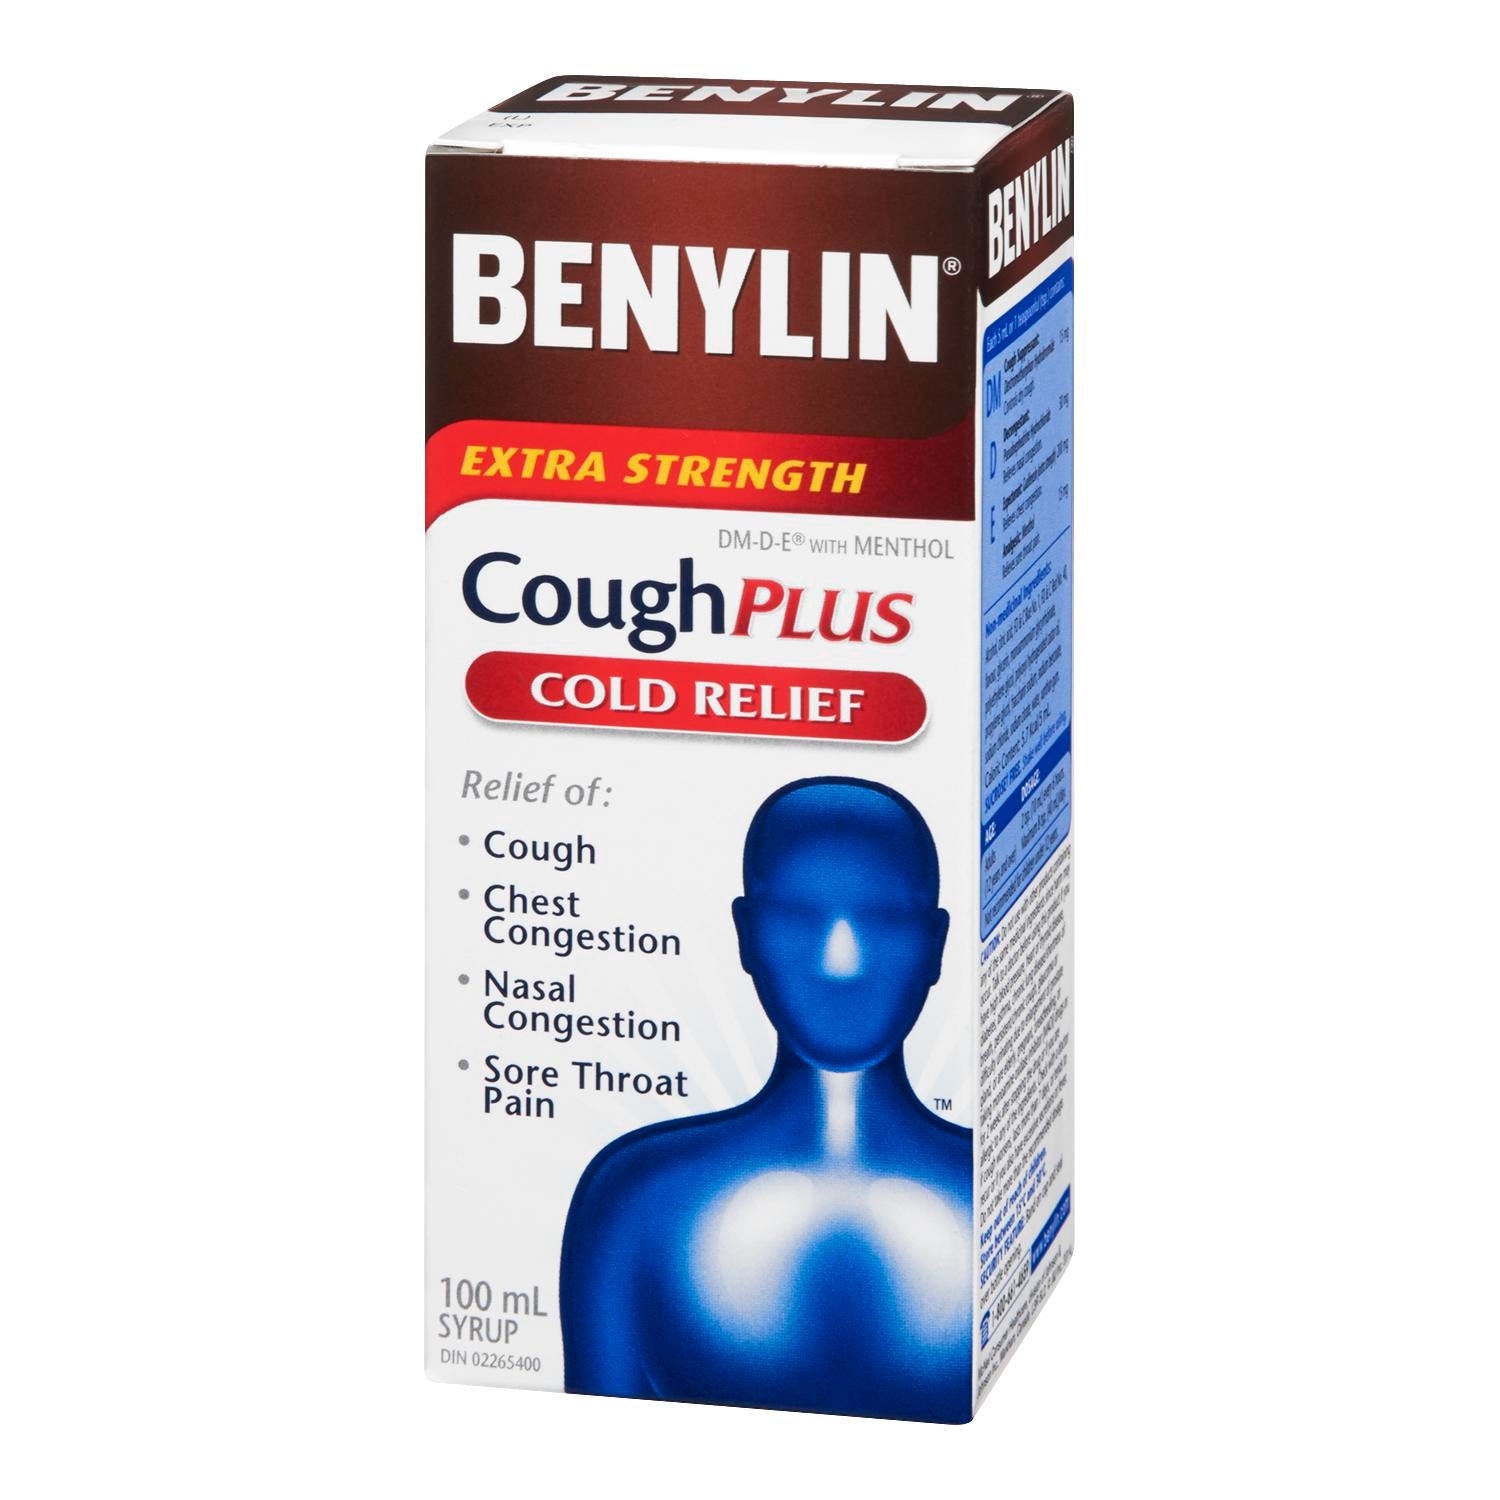 Benylin Cough Plus Cold Relief Extra Strength